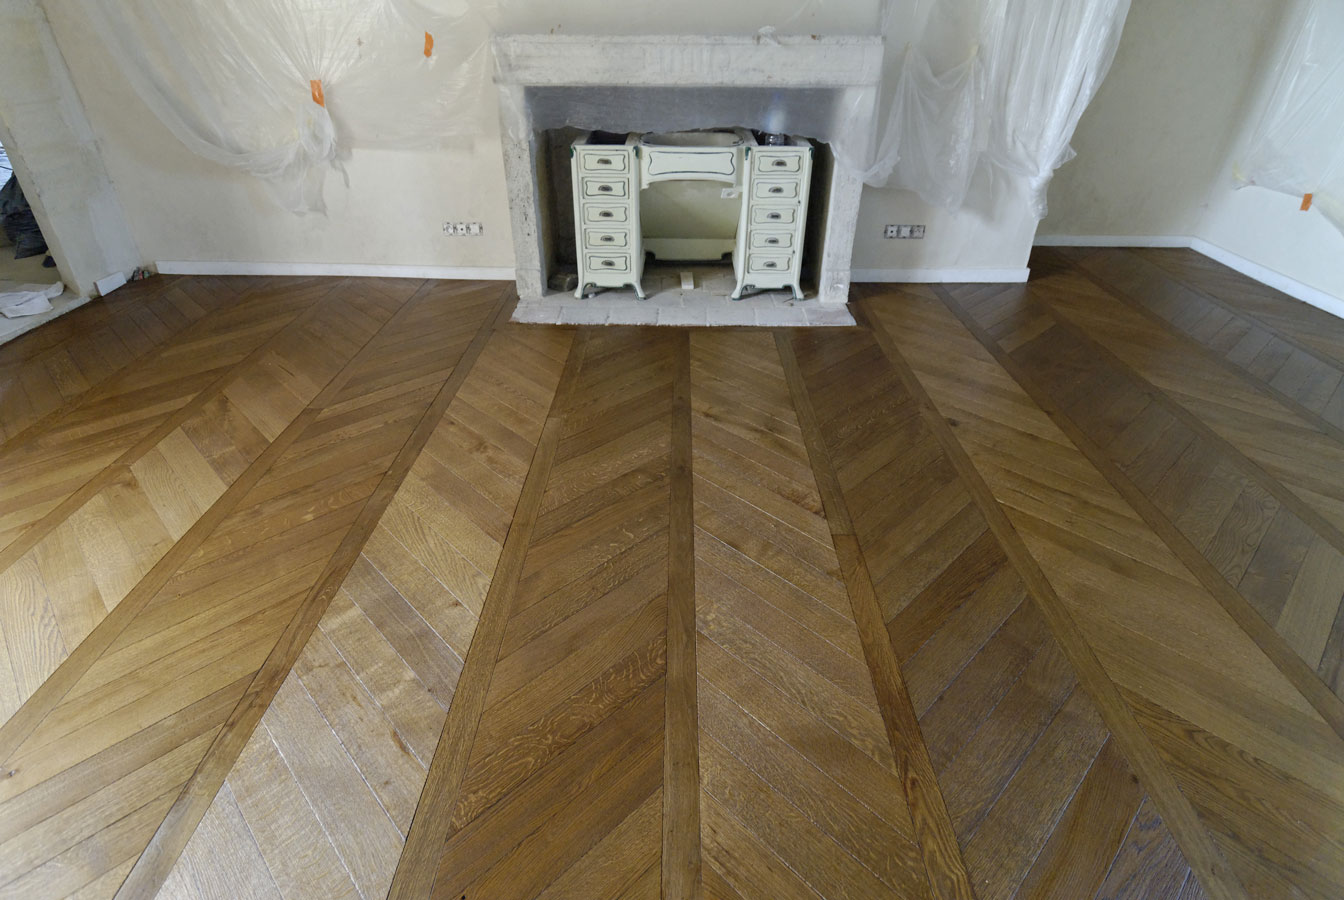 Parquet floor Chevron with finishing of aged patined oiled wax